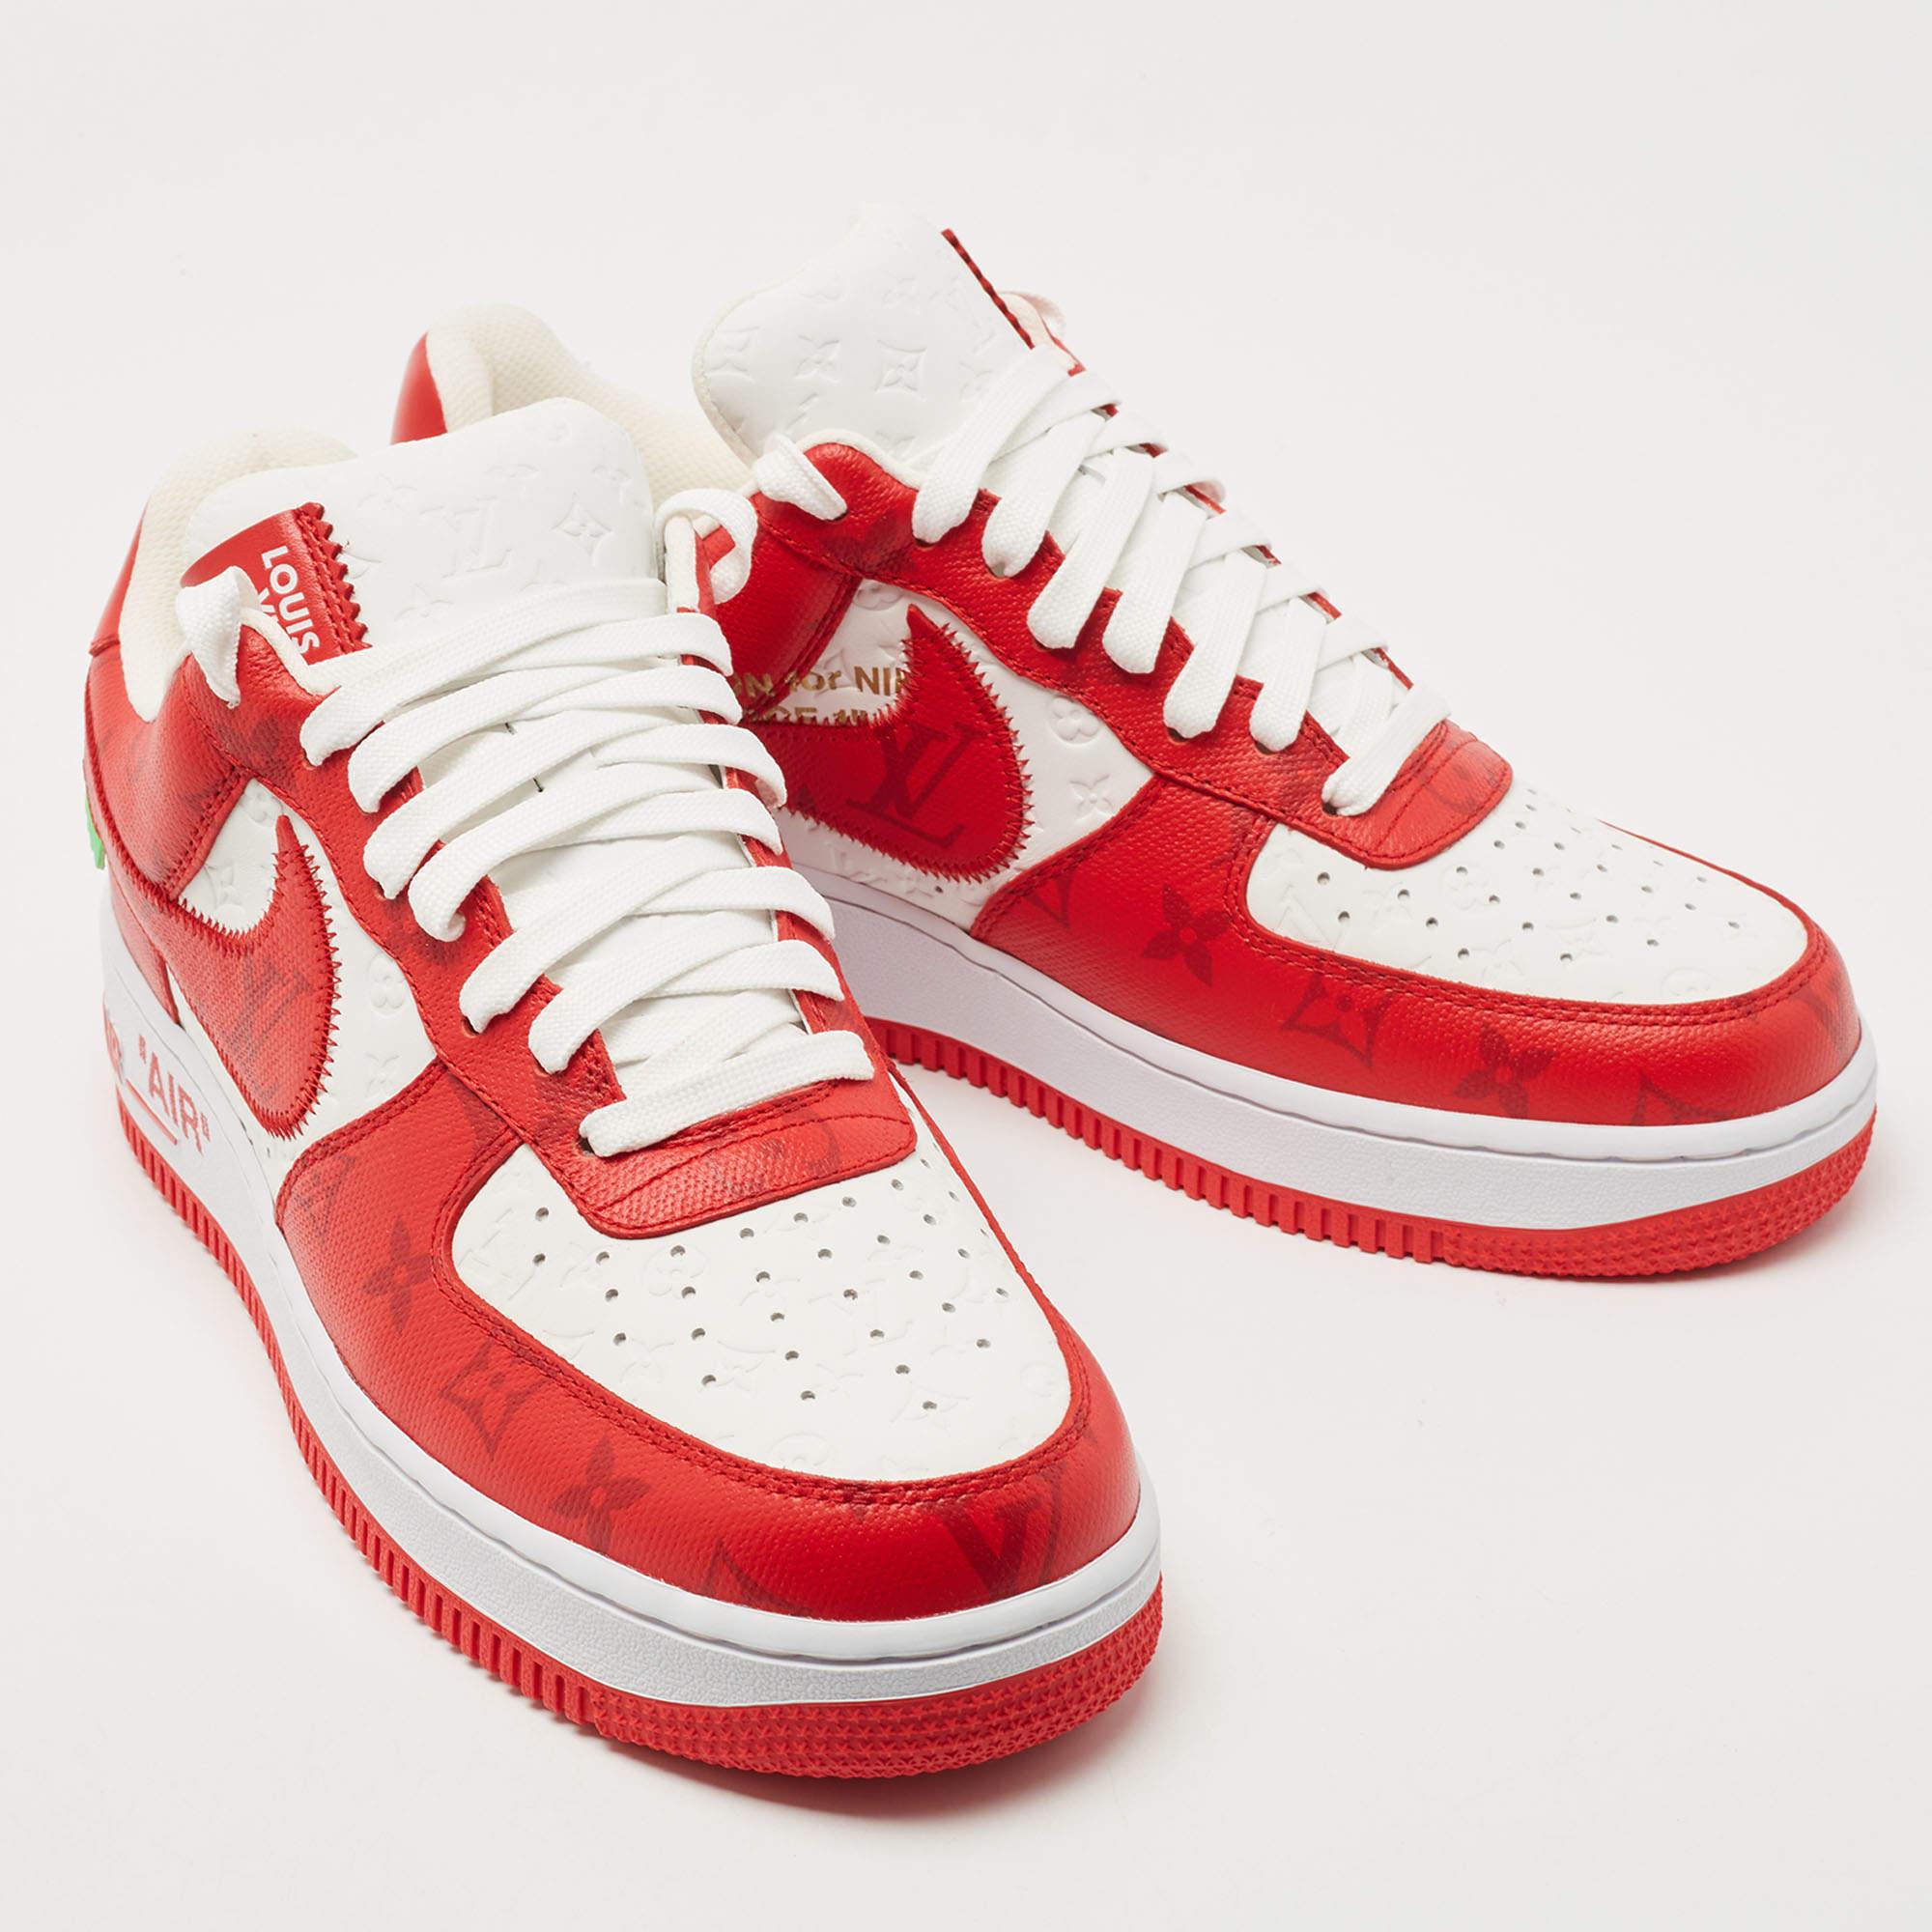 Louis Vuitton x Nike Red/White Monogram Canvas Air Force 1 Sneakers Size 41 1